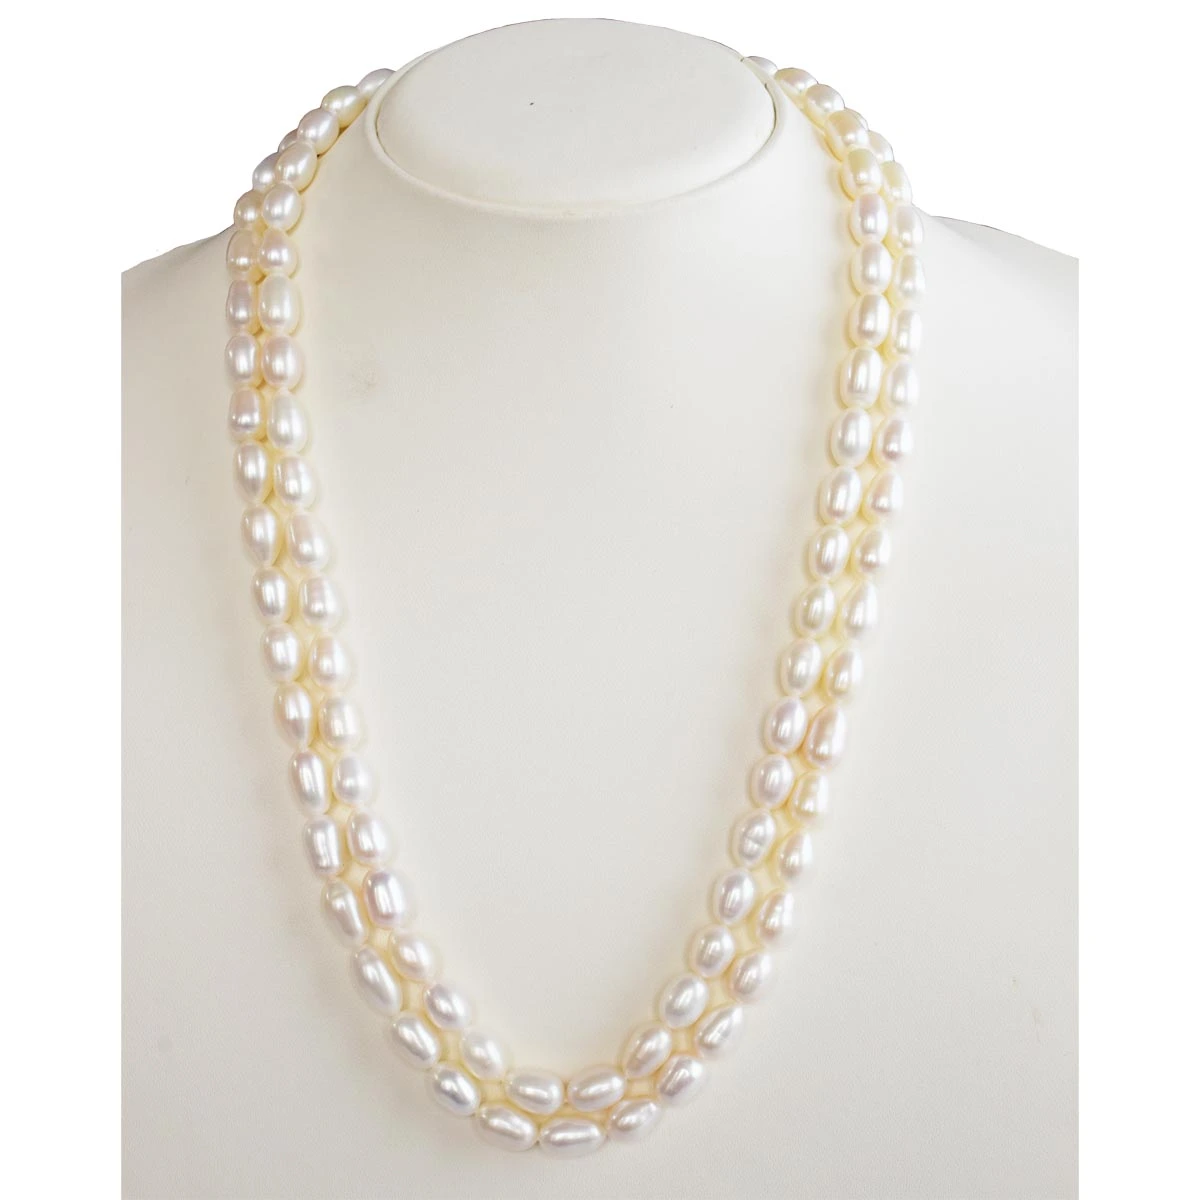 2 Line Real Big Elongated Pearl Necklace for Women (SN1008)